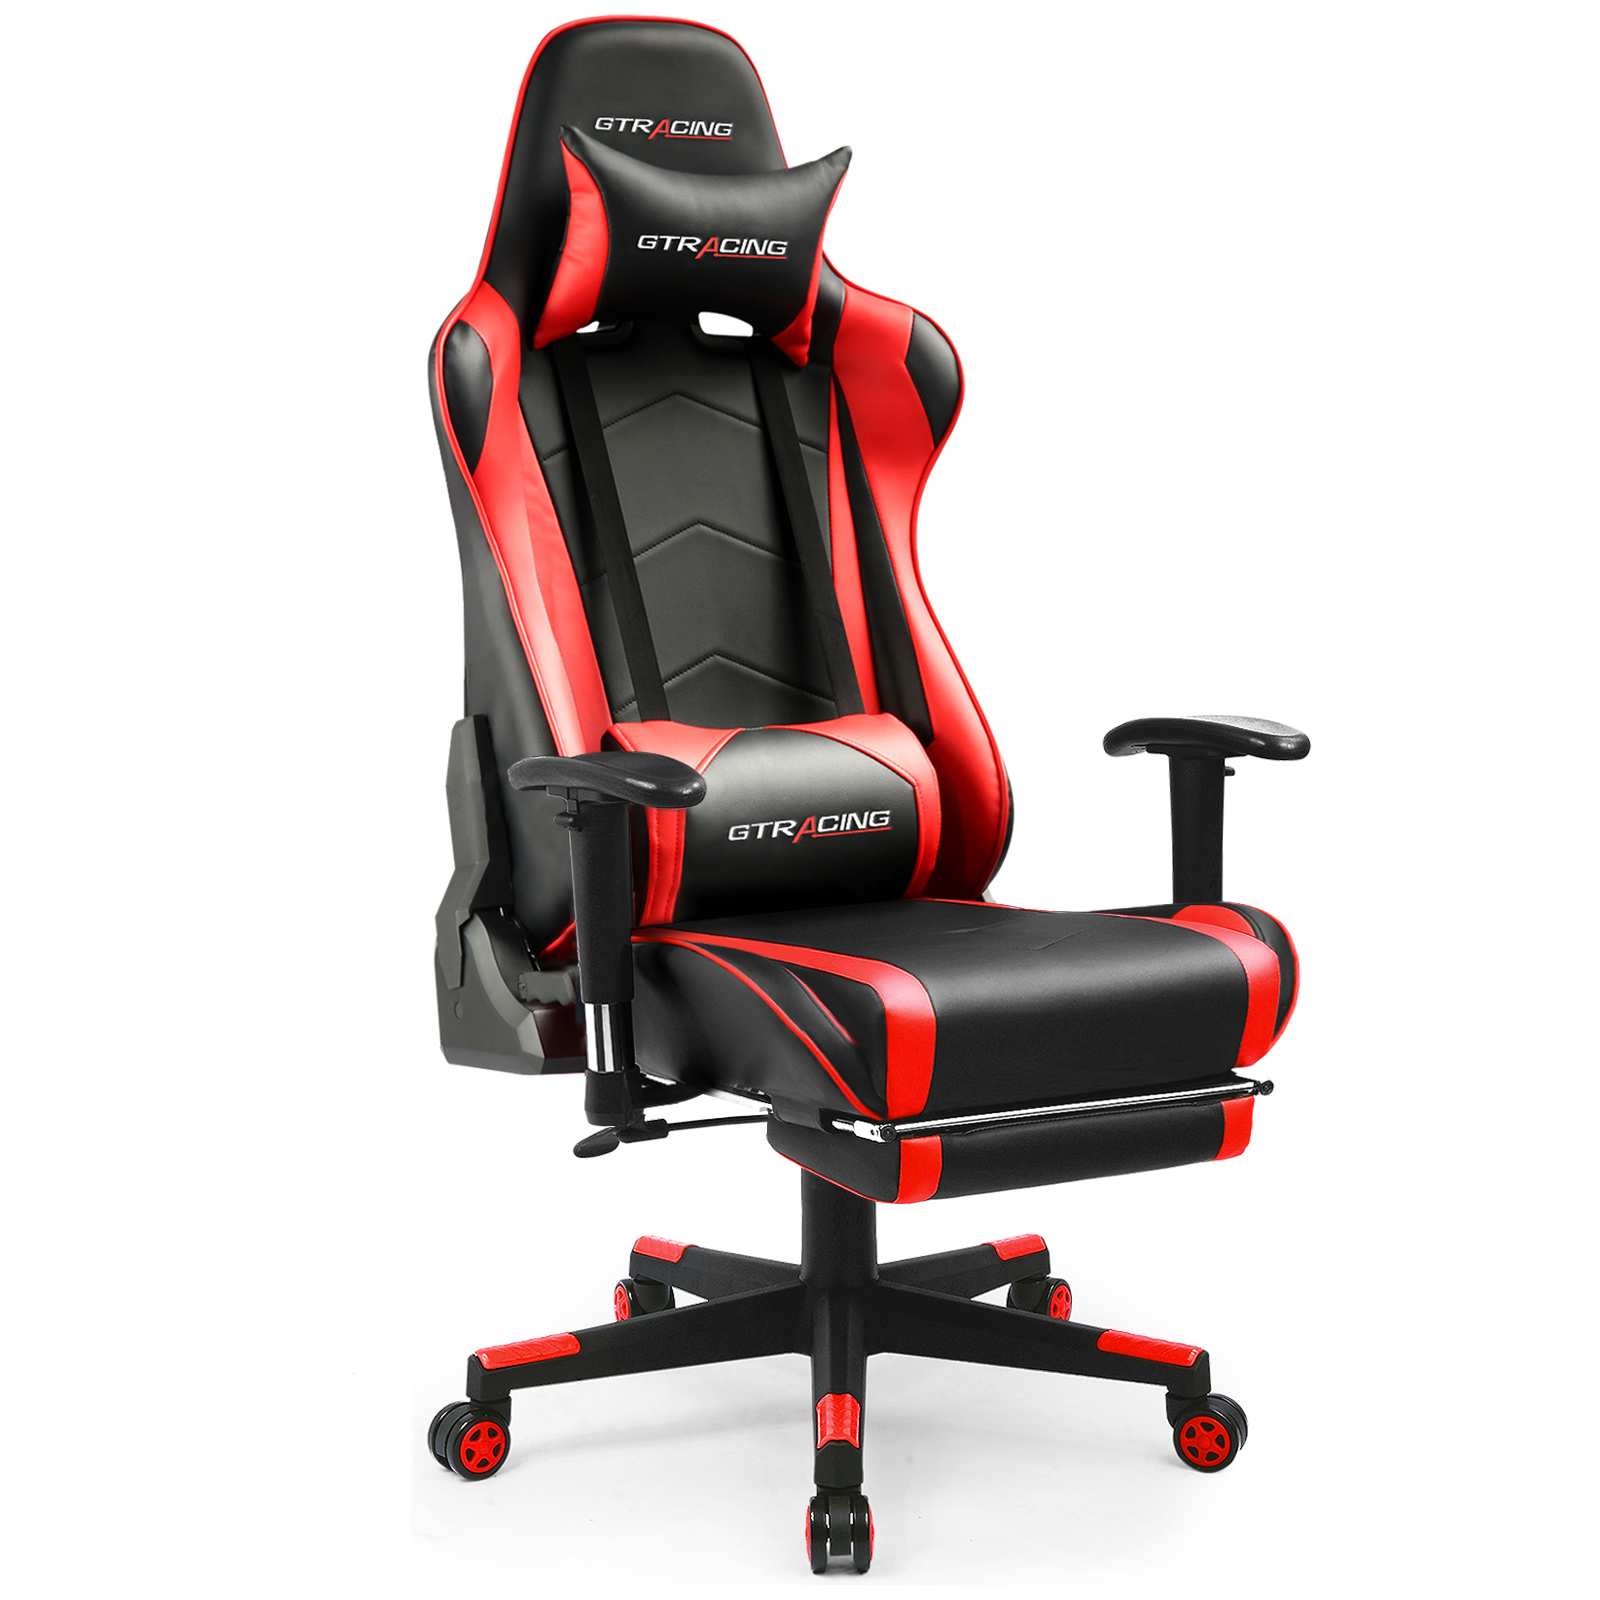 GTRACING Gaming Chair Office Chair PU Leather with Footrest & Adjustable Headrest, Red - image 1 of 6